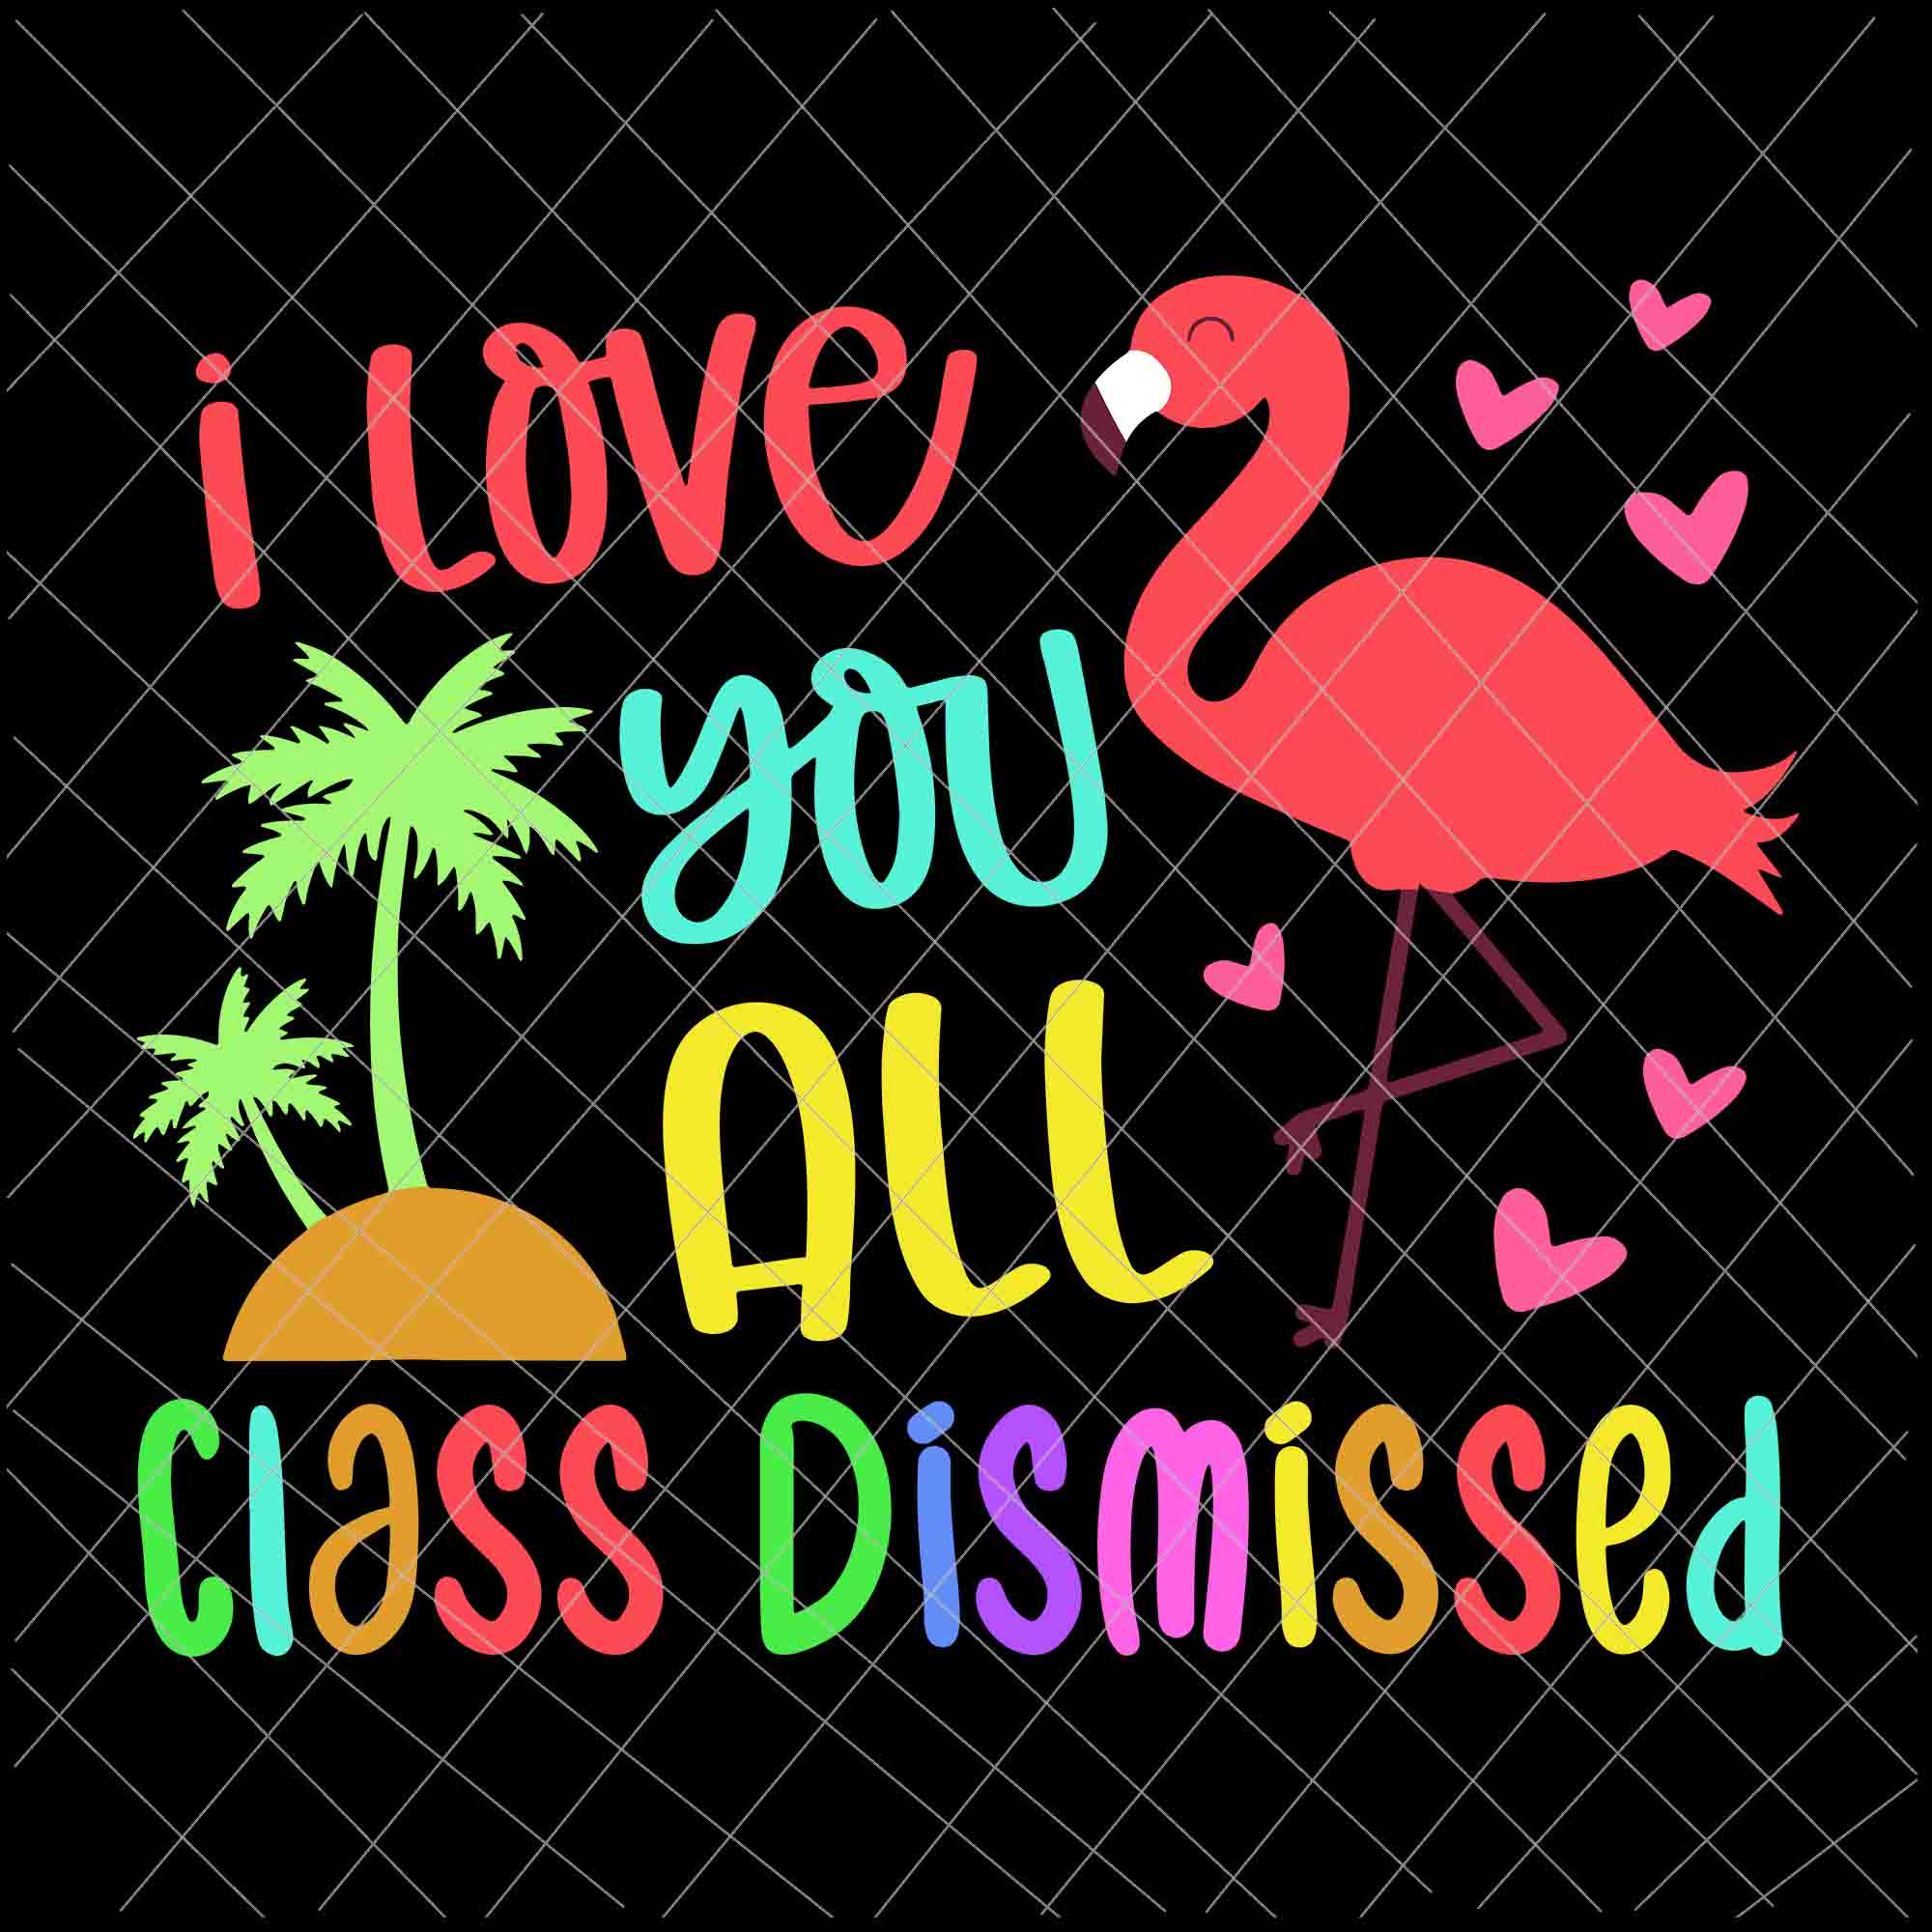 I Love You All Class Dismissed Svg, End Of School Year Teacher Svg, Day Of School Svg